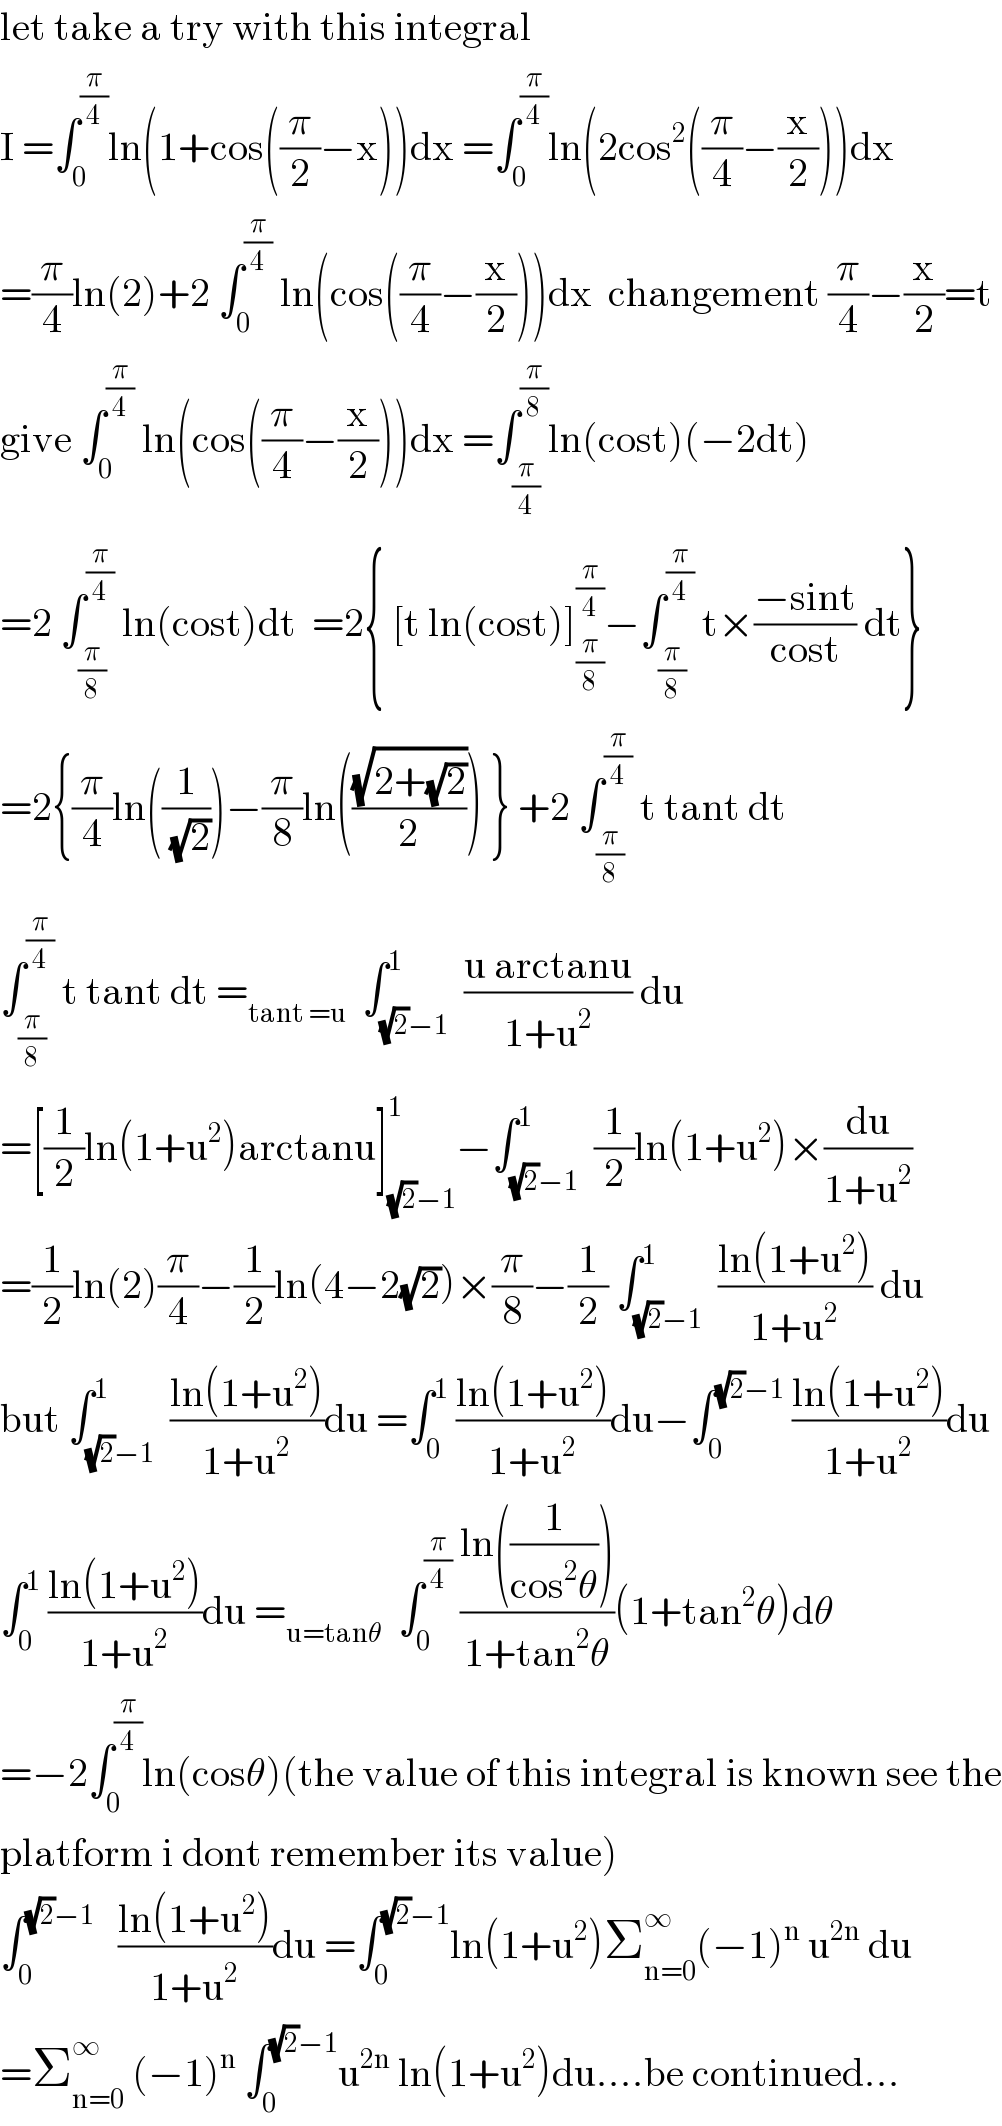 let take a try with this integral  I =∫_0 ^(π/4) ln(1+cos((π/2)−x))dx =∫_0 ^(π/4) ln(2cos^2 ((π/4)−(x/2)))dx  =(π/4)ln(2)+2 ∫_0 ^(π/4)  ln(cos((π/4)−(x/2)))dx  changement (π/4)−(x/2)=t  give ∫_0 ^(π/4)  ln(cos((π/4)−(x/2)))dx =∫_(π/4) ^(π/8) ln(cost)(−2dt)  =2 ∫_(π/8) ^(π/4)  ln(cost)dt  =2{ [t ln(cost)]_(π/8) ^(π/4) −∫_(π/8) ^(π/4)  t×((−sint)/(cost)) dt}  =2{(π/4)ln((1/(√2)))−(π/8)ln(((√(2+(√2)))/2)) } +2 ∫_(π/8) ^(π/4)  t tant dt  ∫_(π/8) ^(π/4)  t tant dt =_(tant =u)   ∫_((√2)−1) ^1  ((u arctanu)/(1+u^2 )) du  =[(1/2)ln(1+u^2 )arctanu]_((√2)−1) ^1 −∫_((√2)−1) ^1  (1/2)ln(1+u^2 )×(du/(1+u^2 ))  =(1/2)ln(2)(π/4)−(1/2)ln(4−2(√2))×(π/8)−(1/2) ∫_((√2)−1) ^1  ((ln(1+u^2 ))/(1+u^2 )) du  but ∫_((√2)−1) ^1  ((ln(1+u^2 ))/(1+u^2 ))du =∫_0 ^1  ((ln(1+u^2 ))/(1+u^2 ))du−∫_0 ^((√2)−1)  ((ln(1+u^2 ))/(1+u^2 ))du  ∫_0 ^1  ((ln(1+u^2 ))/(1+u^2 ))du =_(u=tanθ)   ∫_0 ^(π/4)  ((ln((1/(cos^2 θ))))/(1+tan^2 θ))(1+tan^2 θ)dθ  =−2∫_0 ^(π/4) ln(cosθ)(the value of this integral is known see the  platform i dont remember its value)  ∫_0 ^((√2)−1)    ((ln(1+u^2 ))/(1+u^2 ))du =∫_0 ^((√2)−1) ln(1+u^2 )Σ_(n=0) ^∞ (−1)^n  u^(2n)  du  =Σ_(n=0) ^∞  (−1)^n  ∫_0 ^((√2)−1) u^(2n)  ln(1+u^2 )du....be continued...  